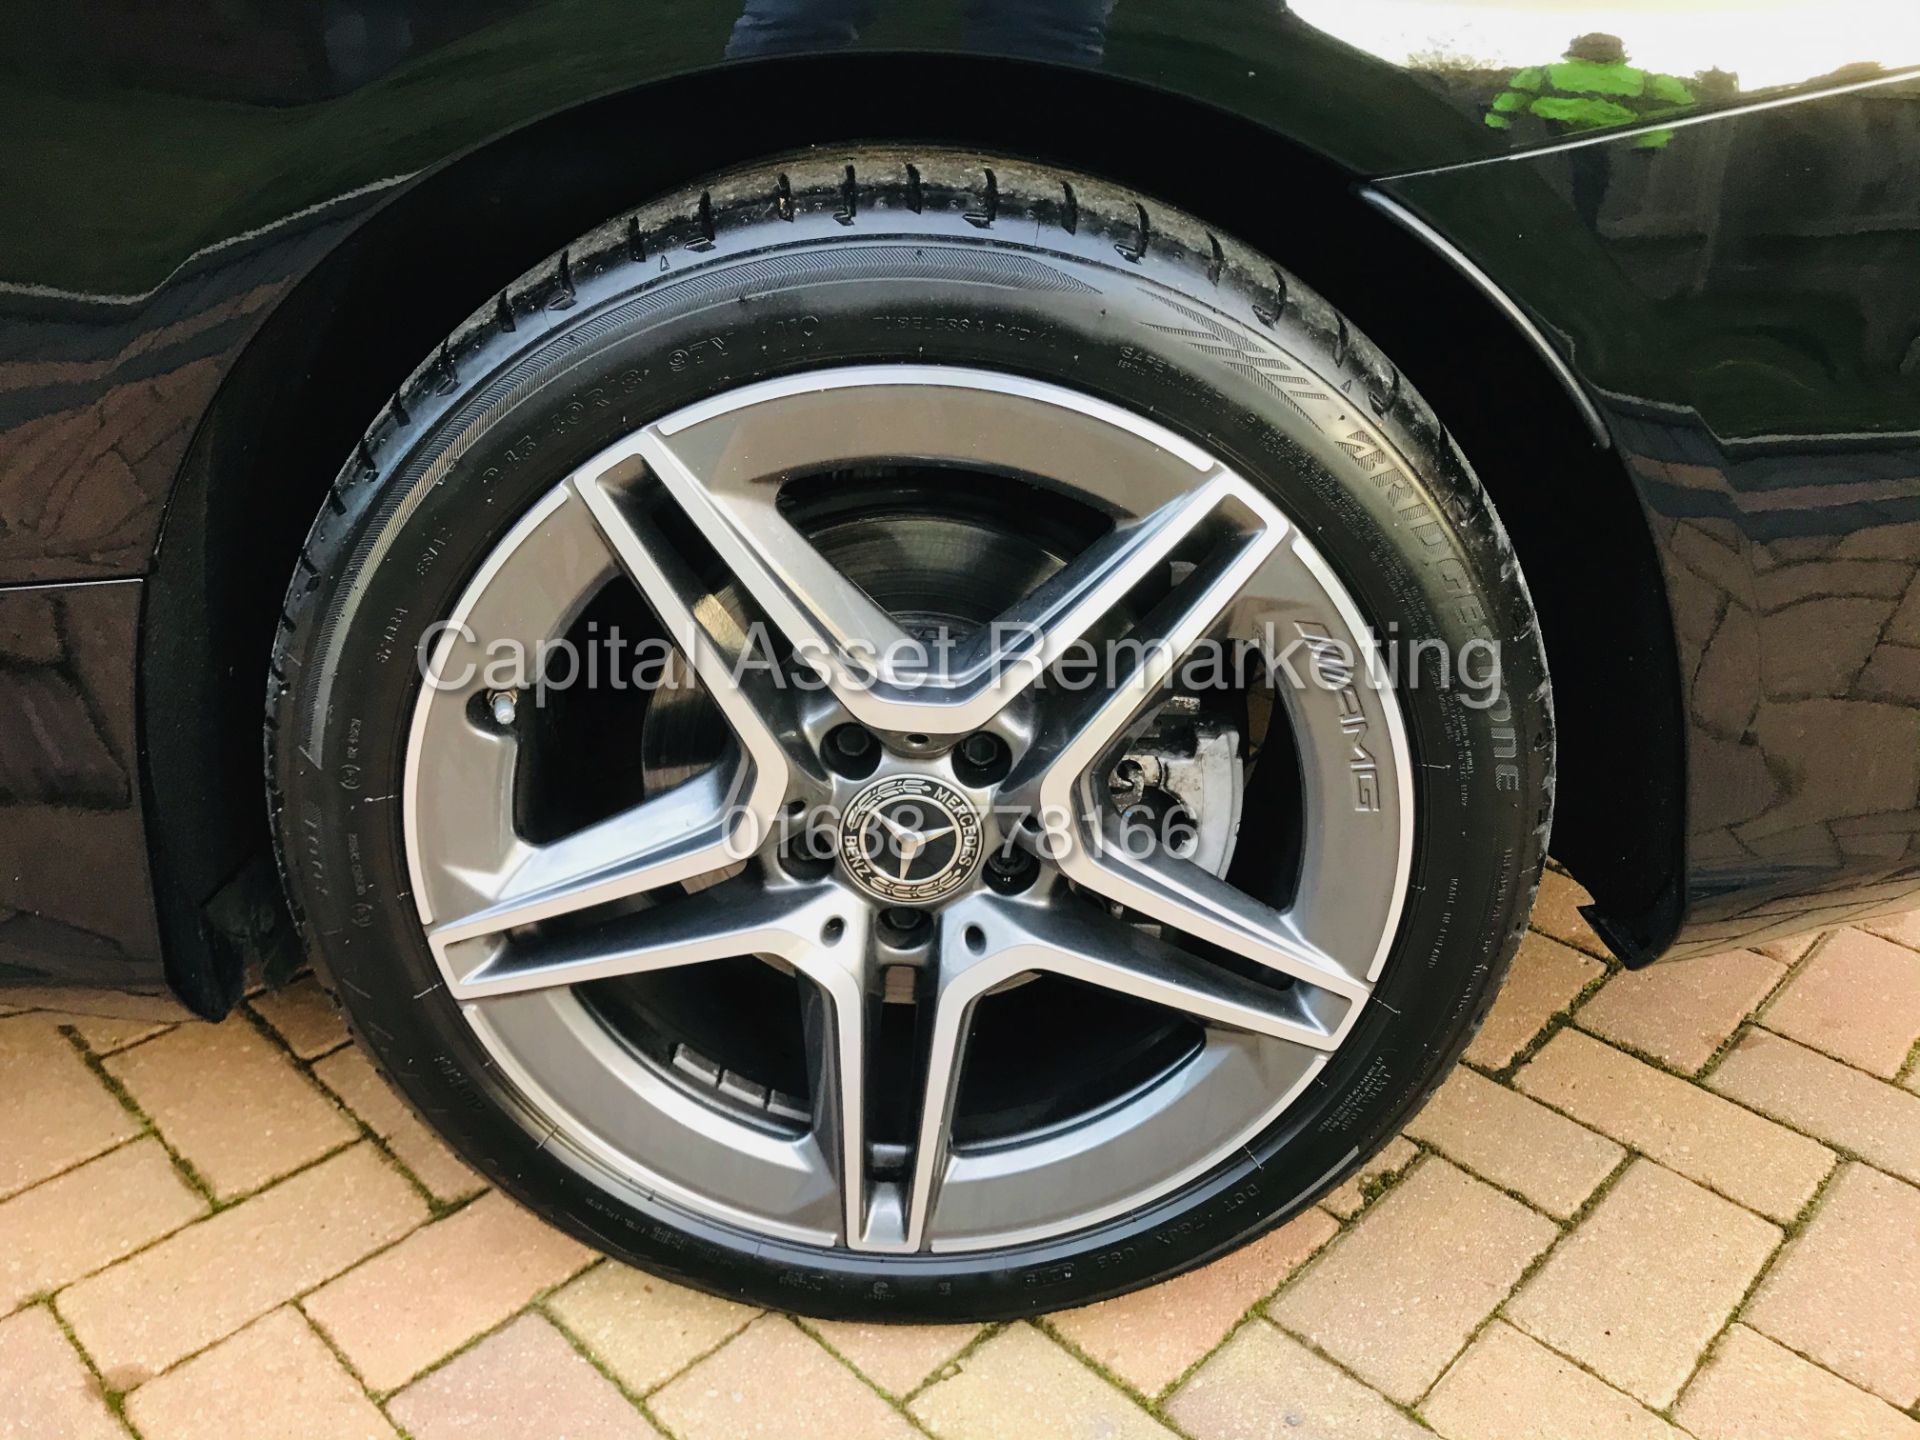 On Sale MERCEDES-BENZ C220d *AMG LINE -CABRIOLET* (2019) '9G TRONIC AUTO - LEATHER - SAT NAV' - Image 18 of 32